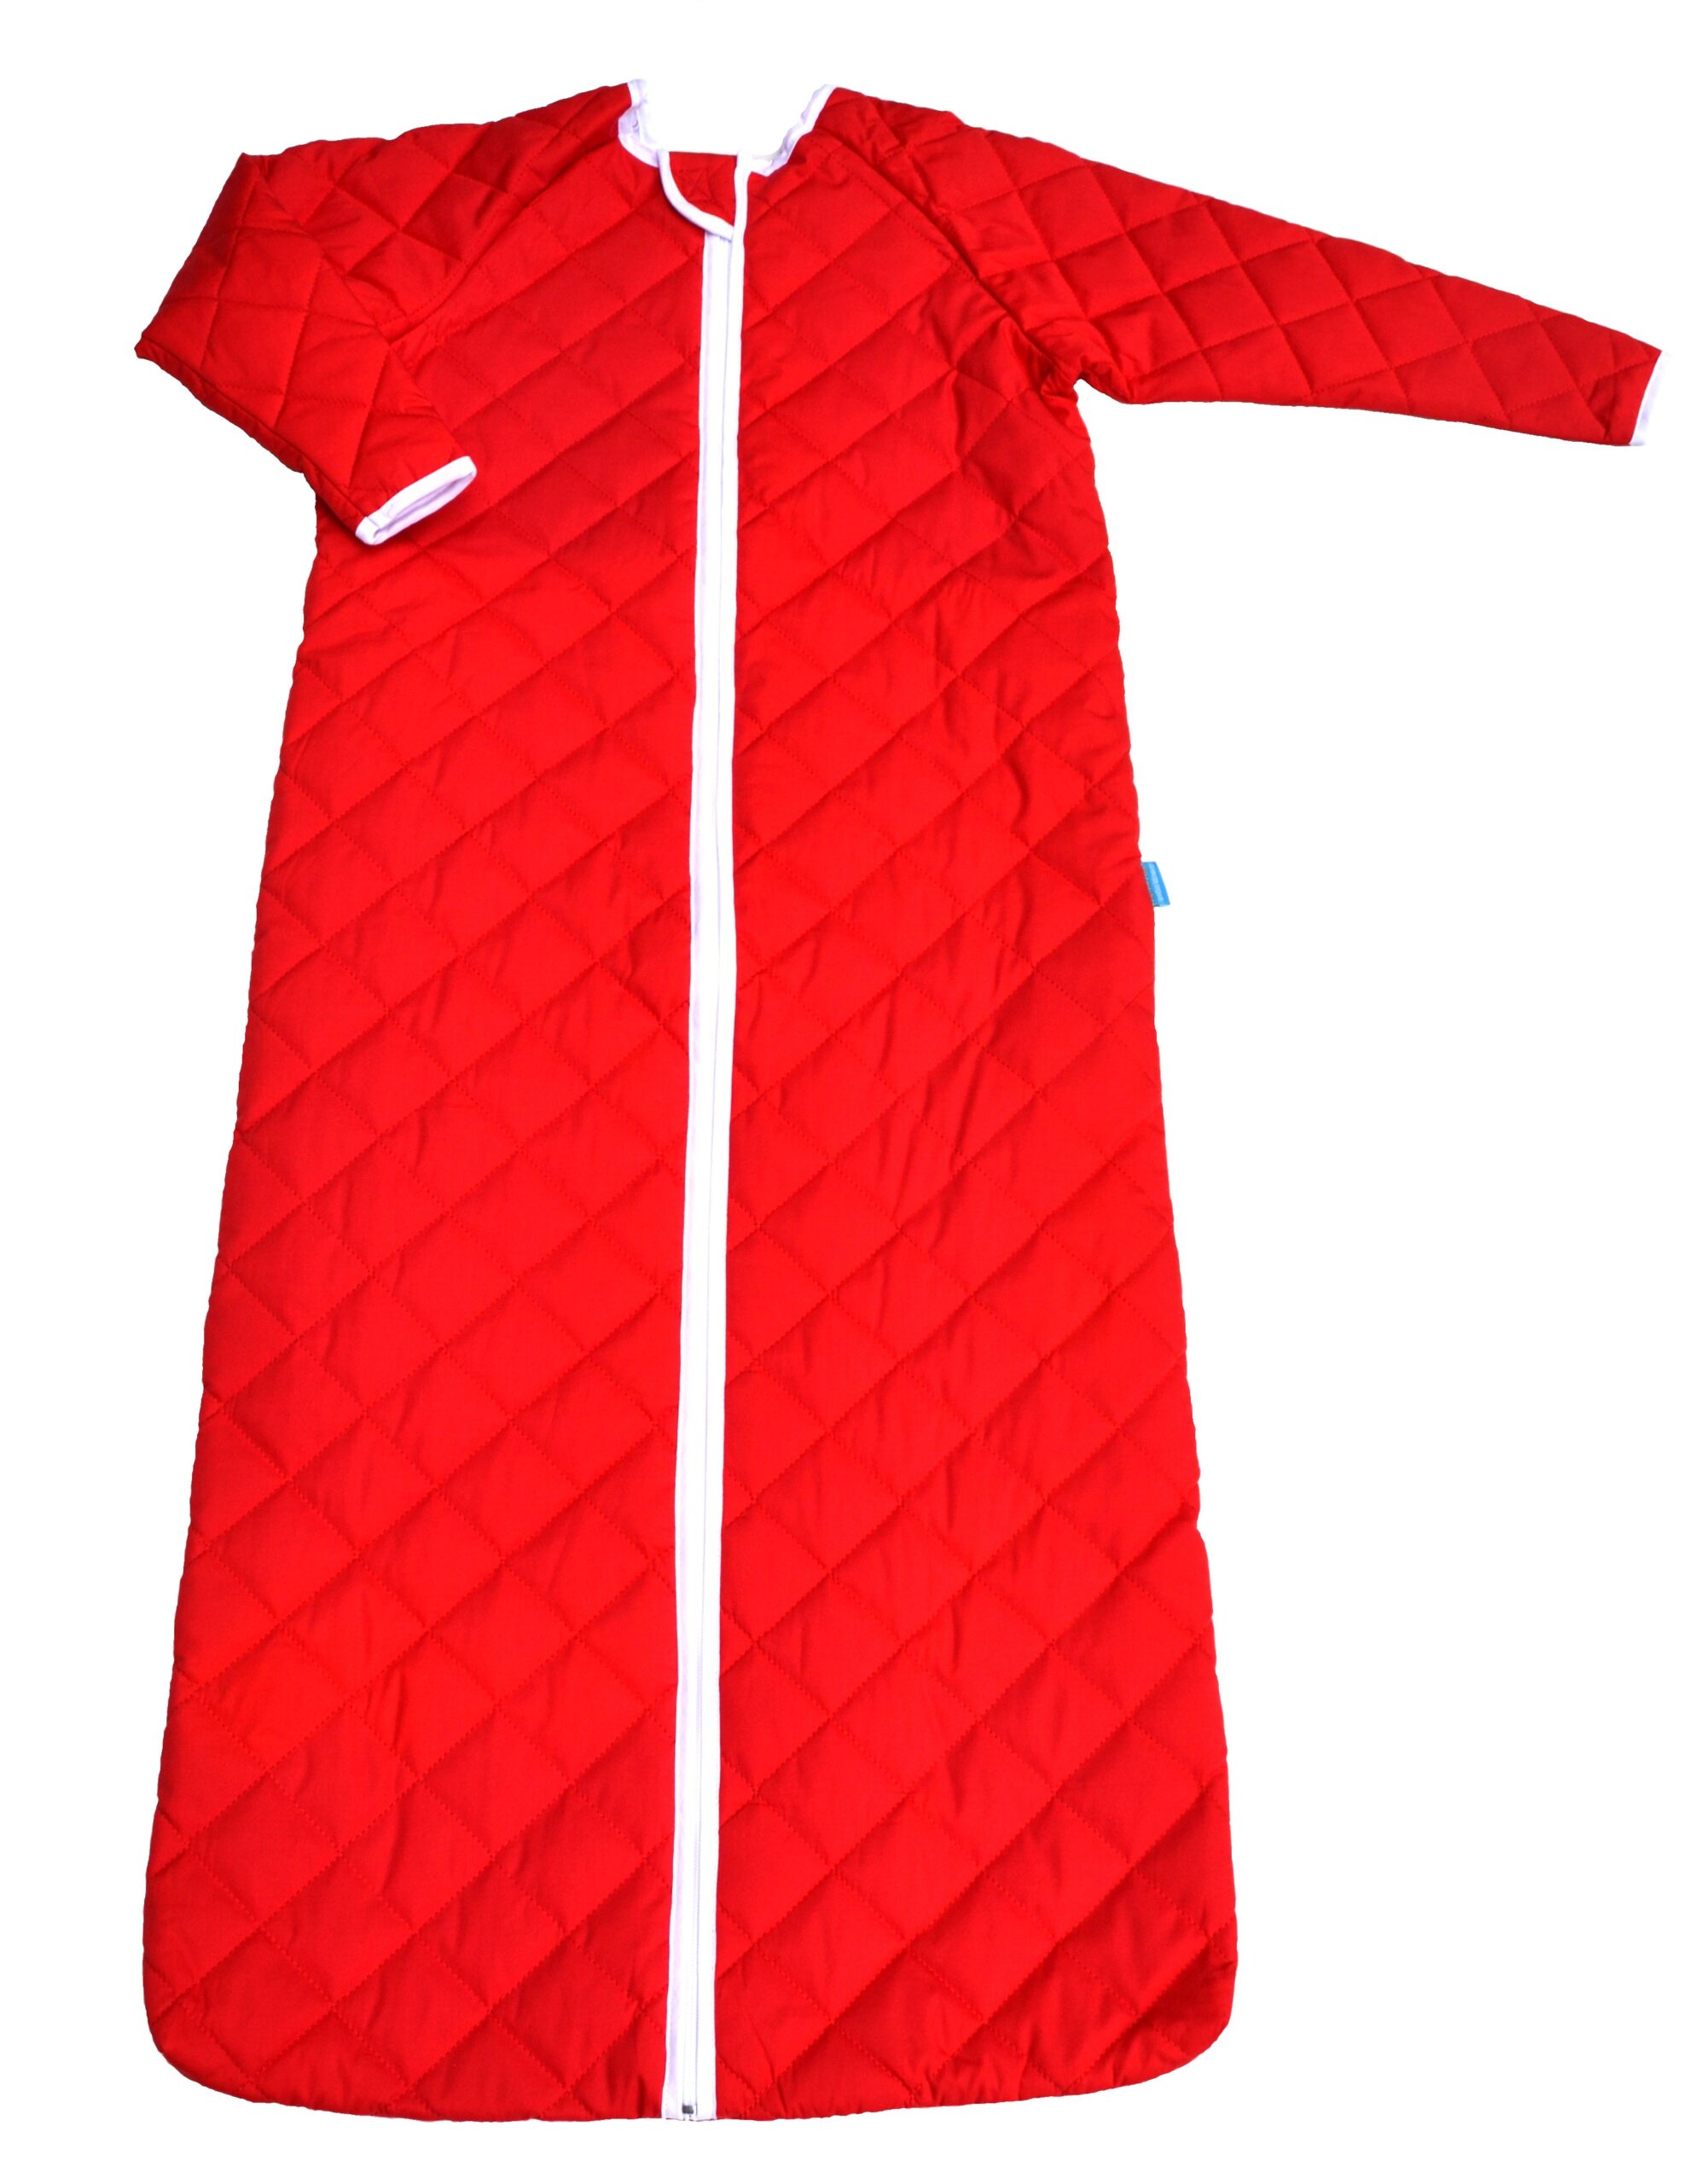 Winter sleeping bag with sleeve zipper on the front or back